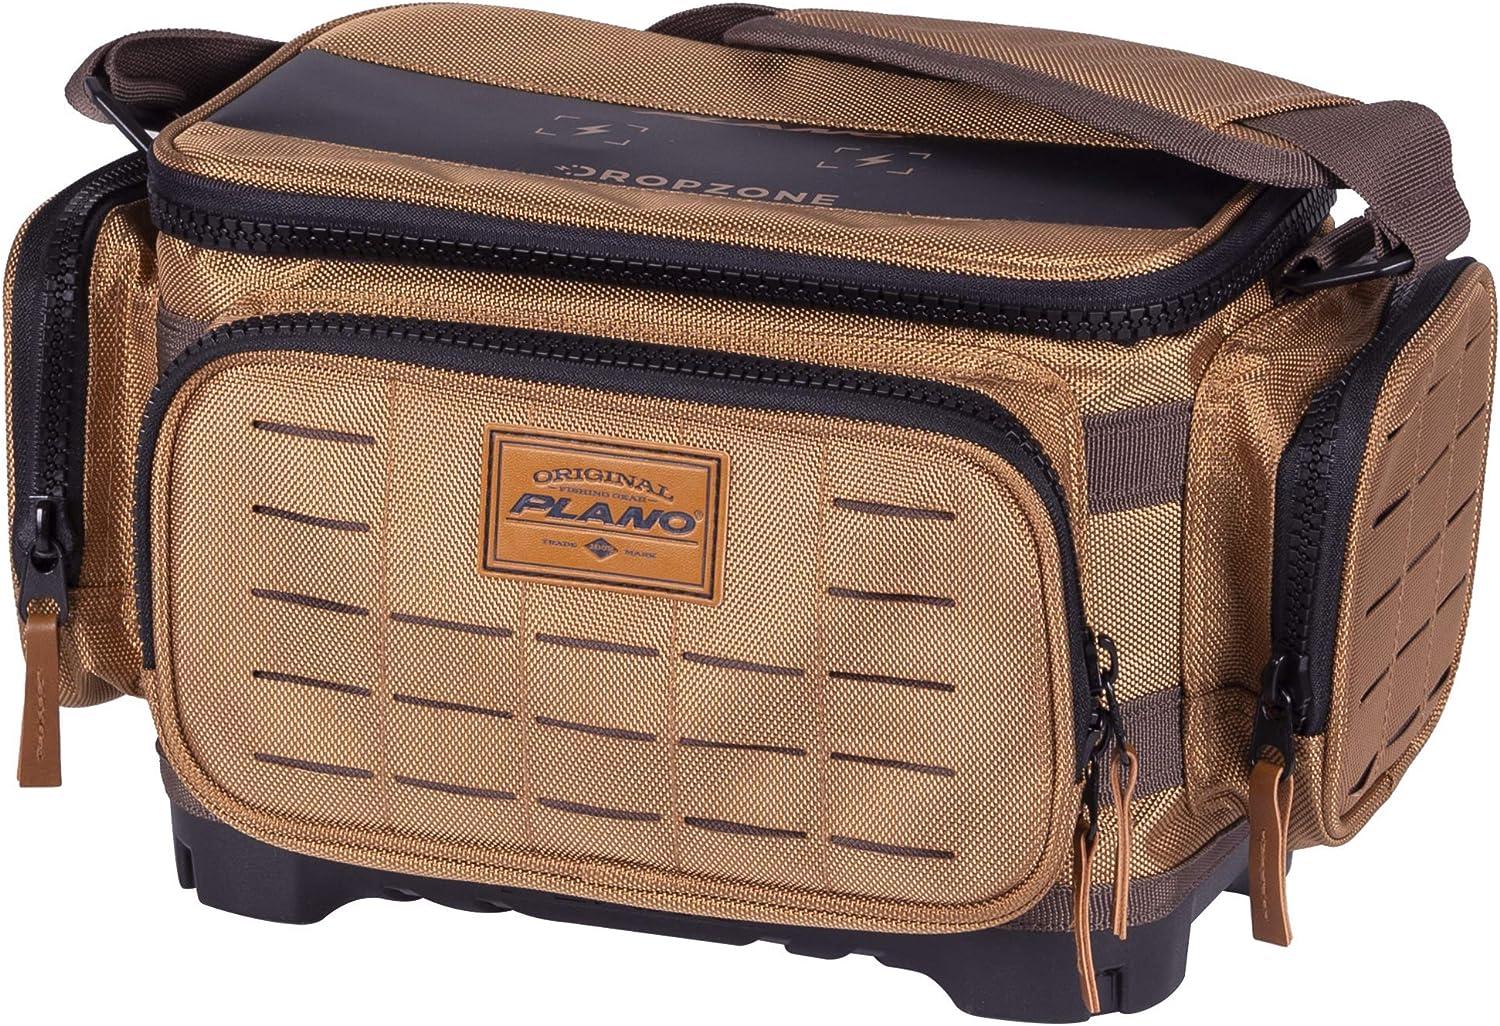 Plano Guide Series 3500 Tackle Bag, Beige, Includes 5 3500 Stowaway  Organization Boxes, Premium Soft Fishing Tackle Storage, Waterproof &  Non-Skid Base